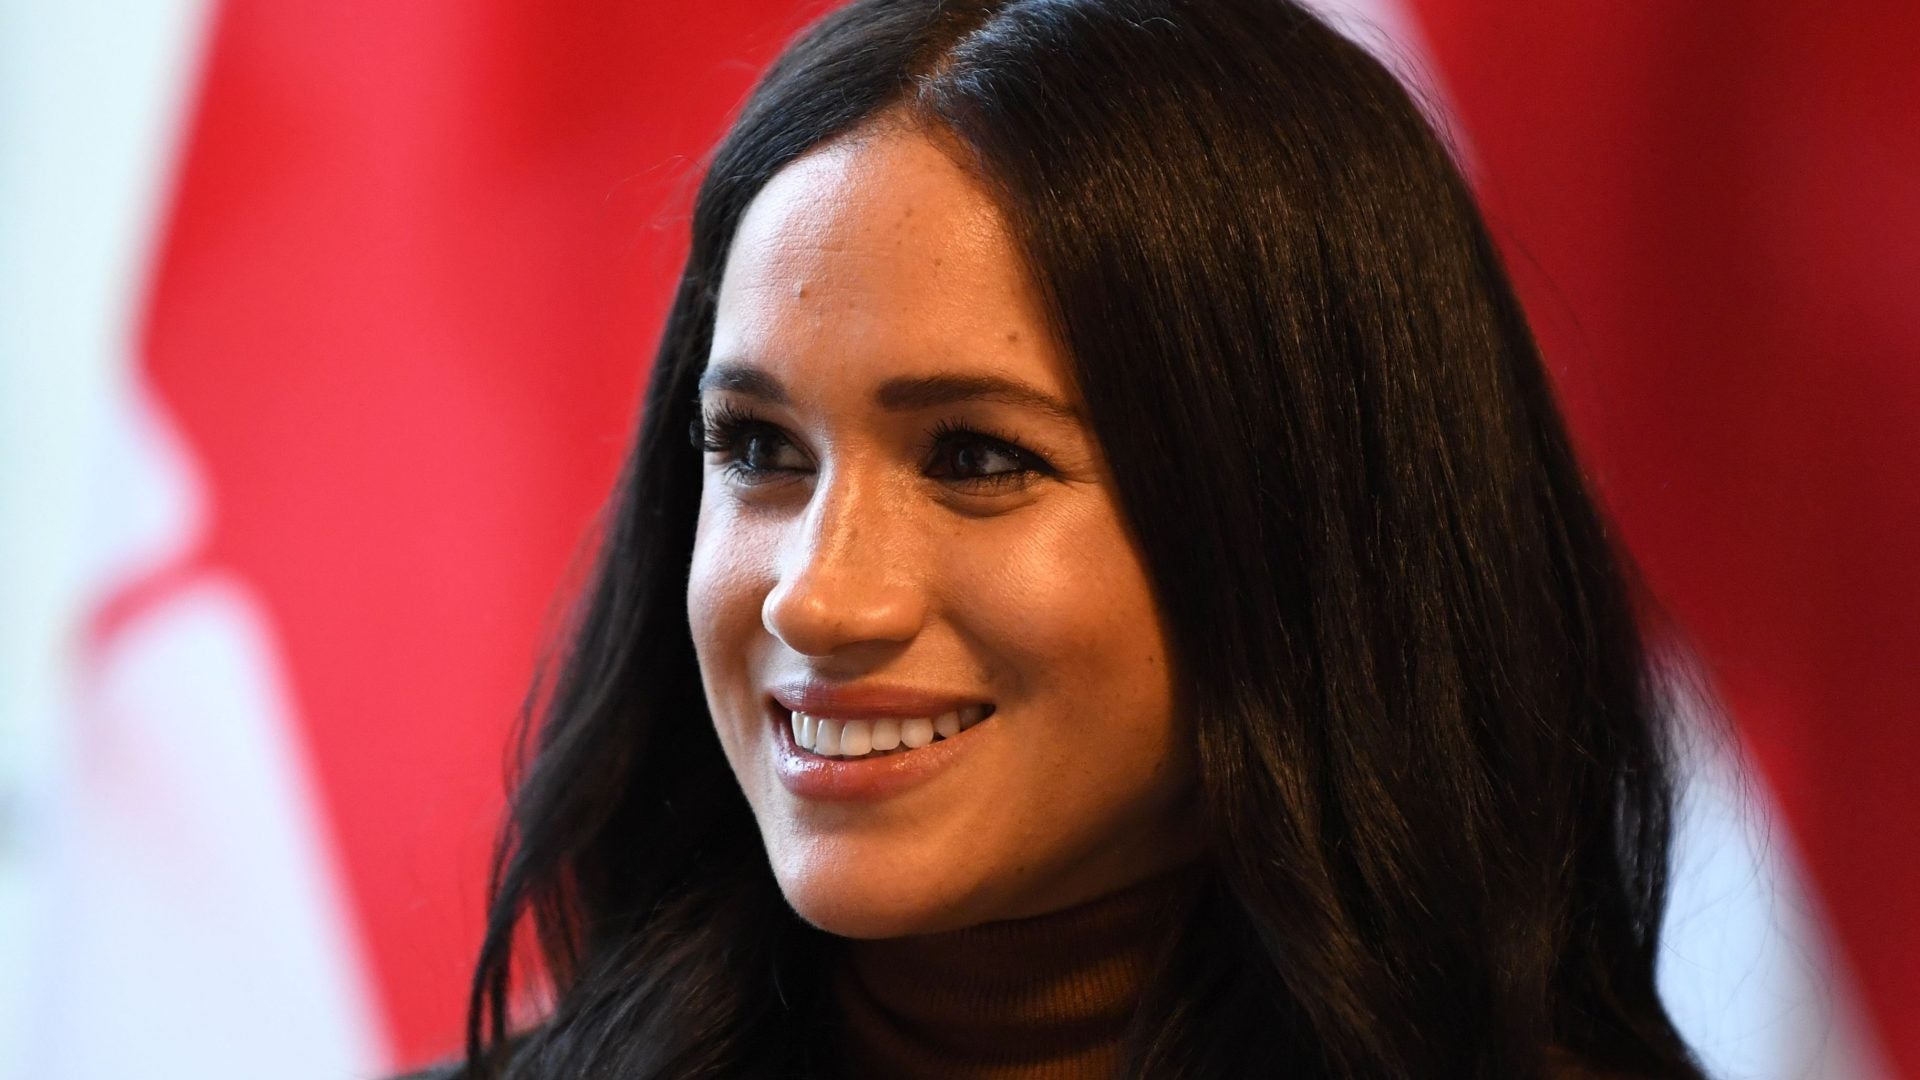 Meghan Markle Opens Up About Her ‘Unbearable Grief’ After Suffering A Miscarriage